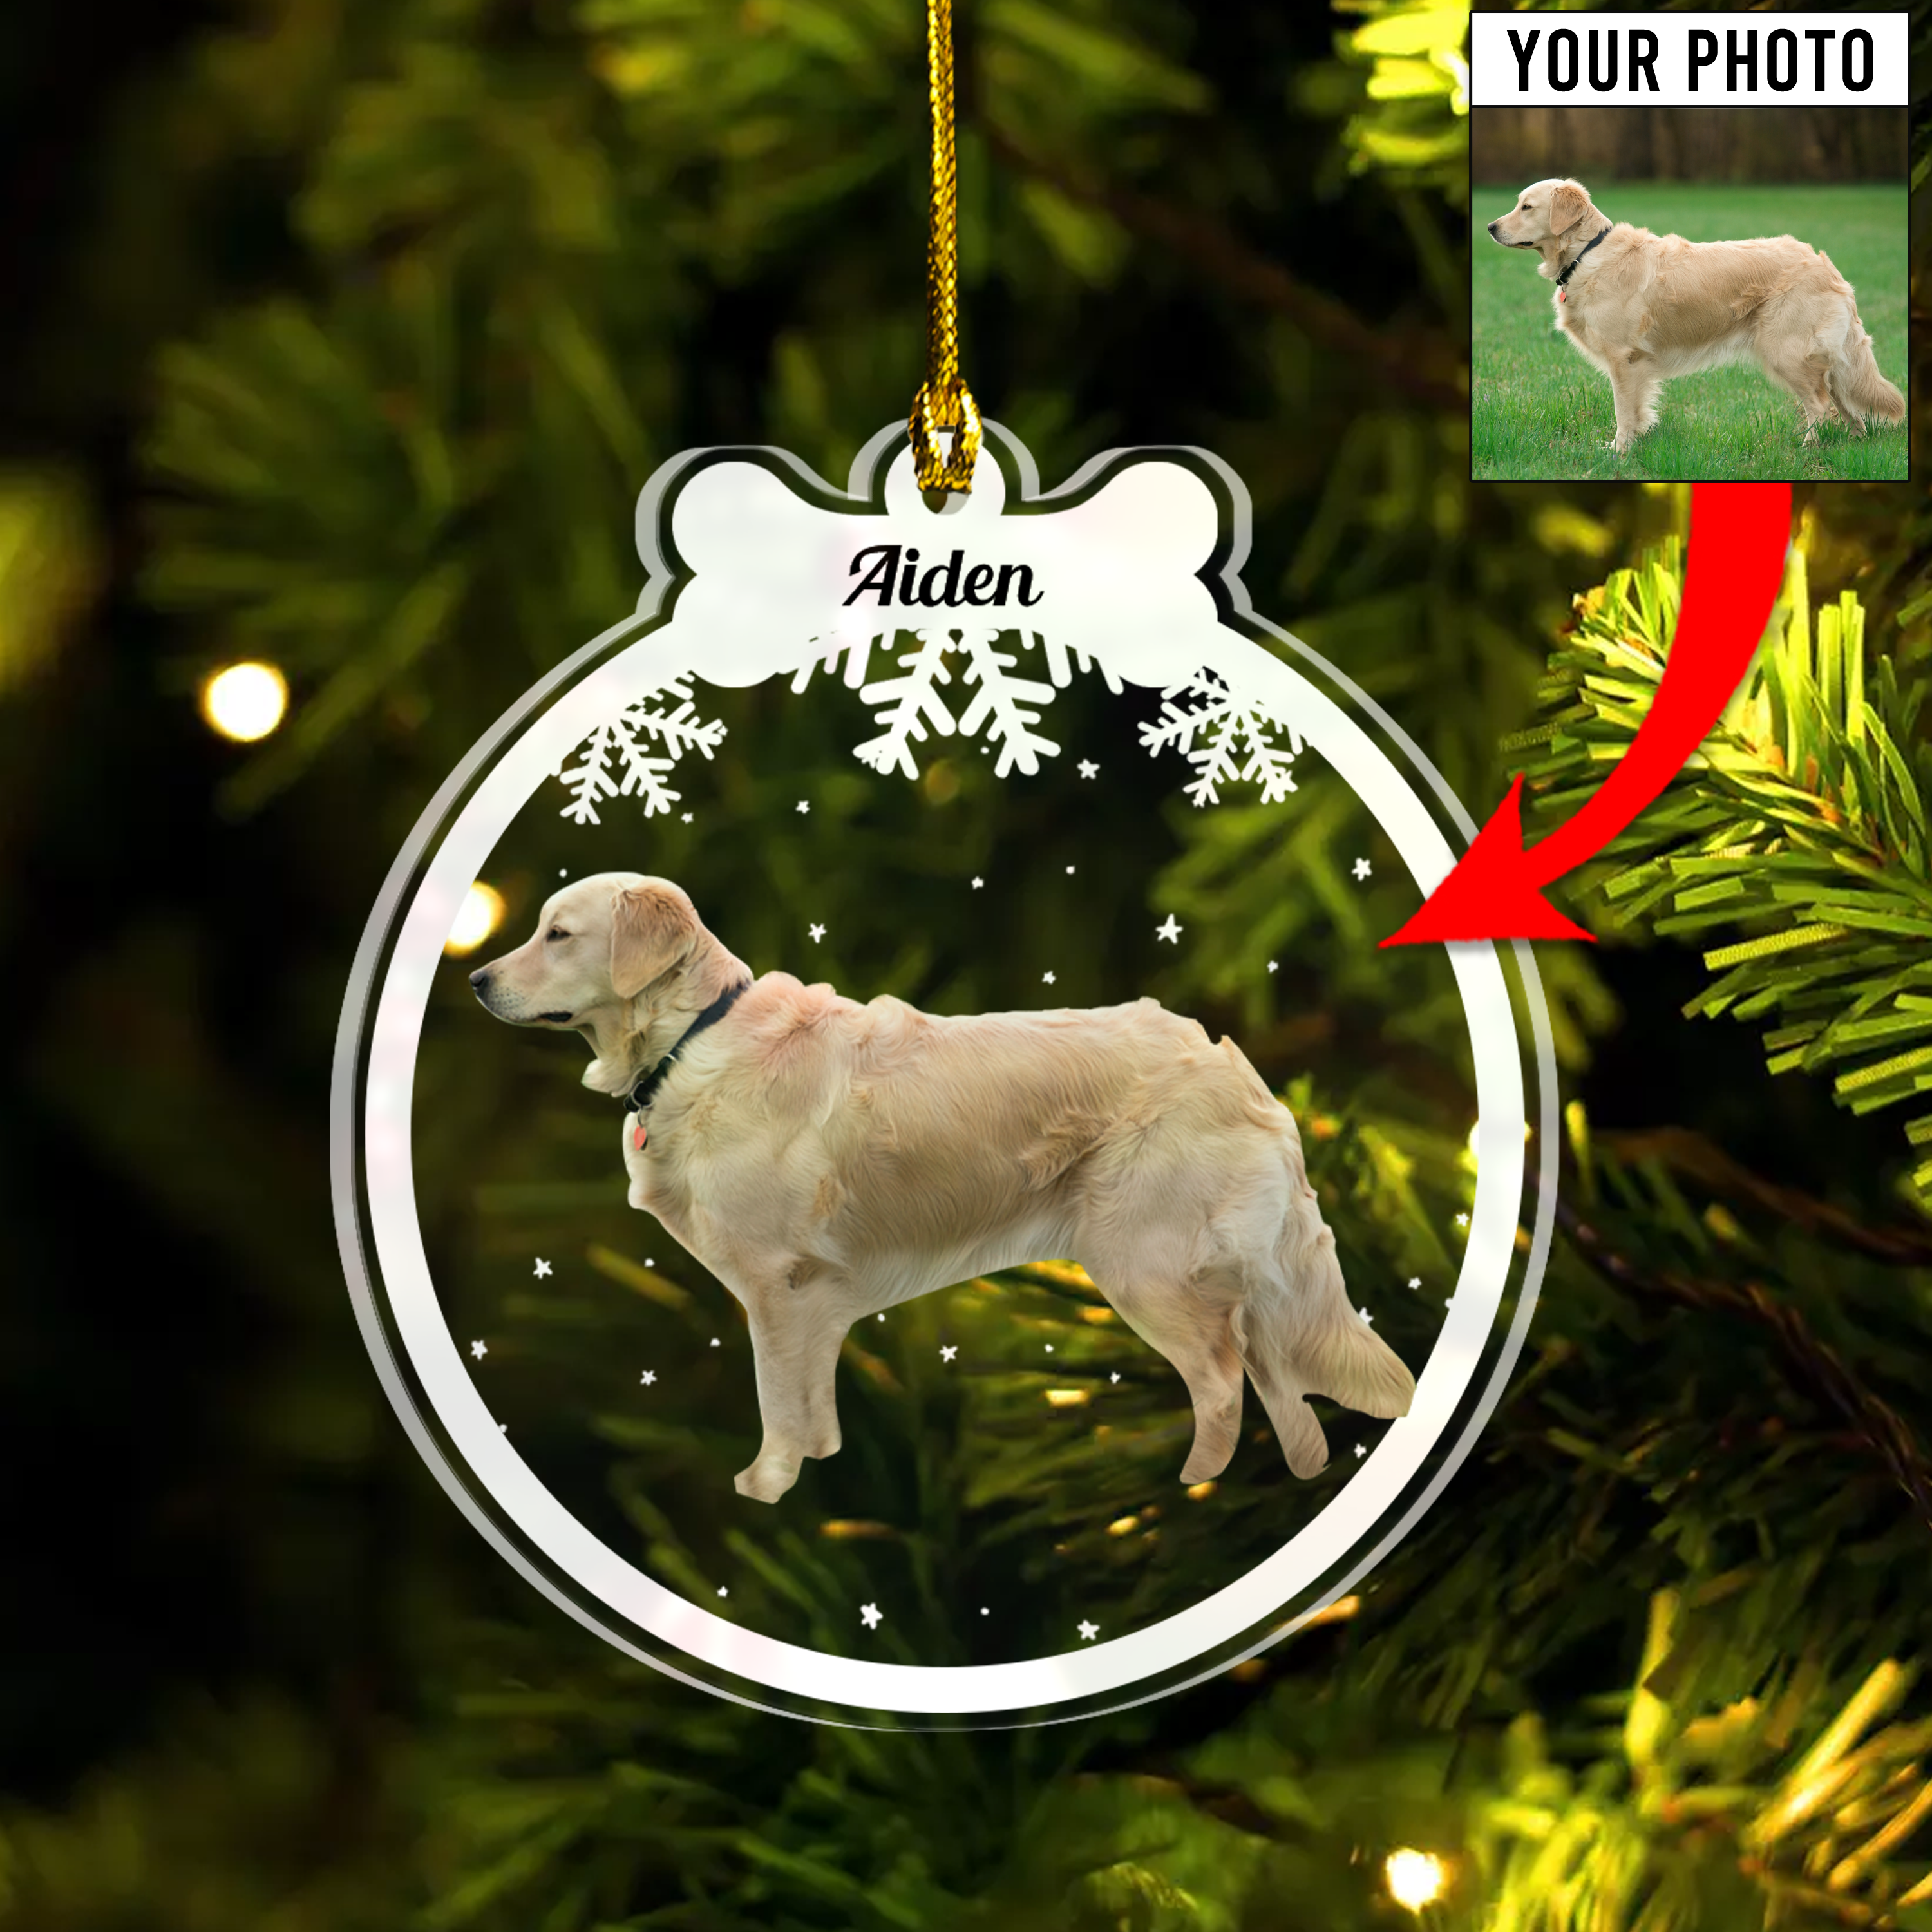 Personalized Dog Photo Ornament, Gift for Dog Lovers